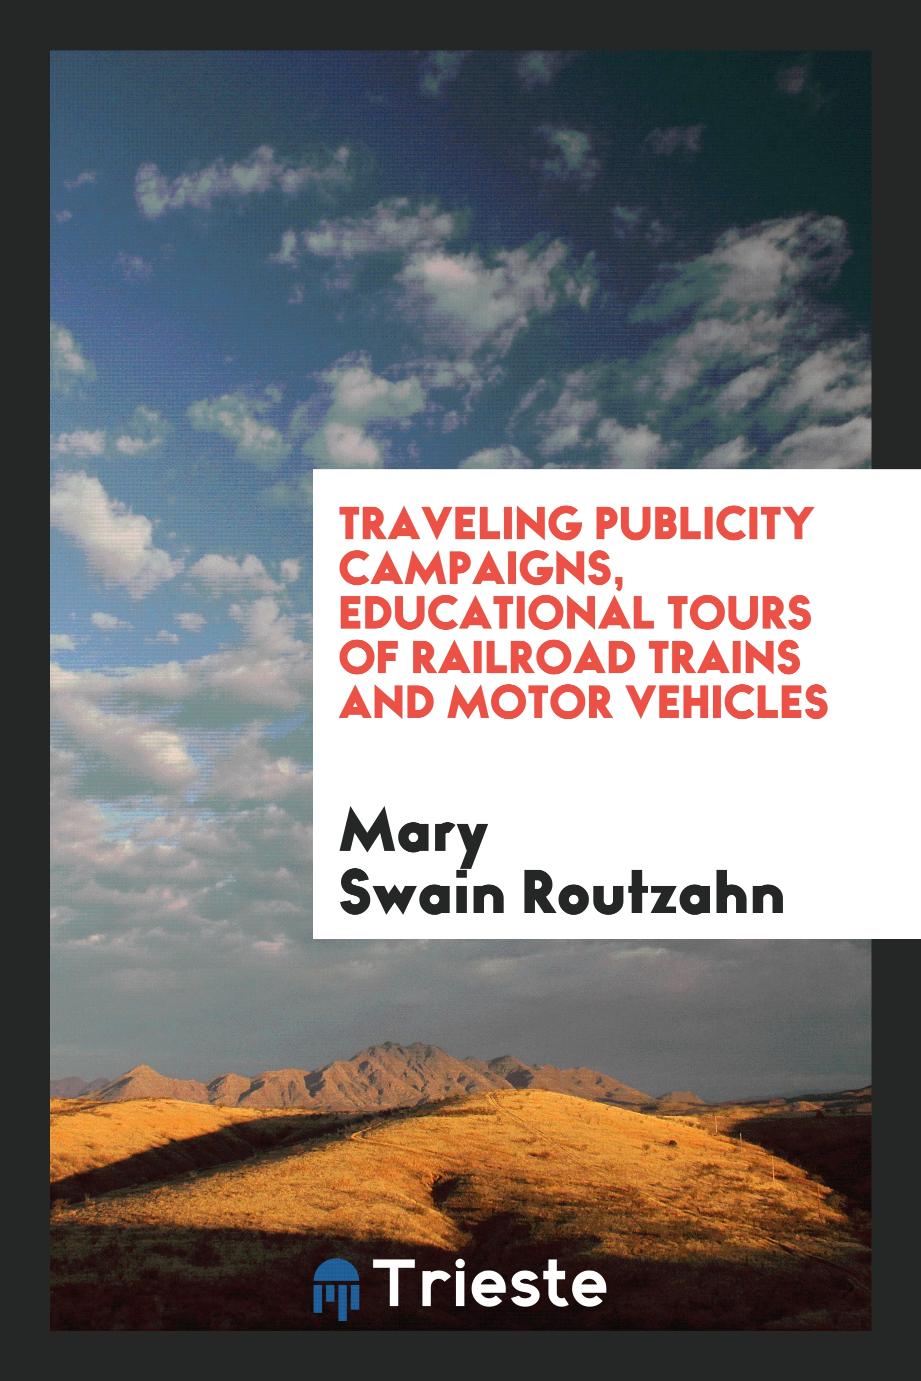 Traveling publicity campaigns, educational tours of railroad trains and motor vehicles